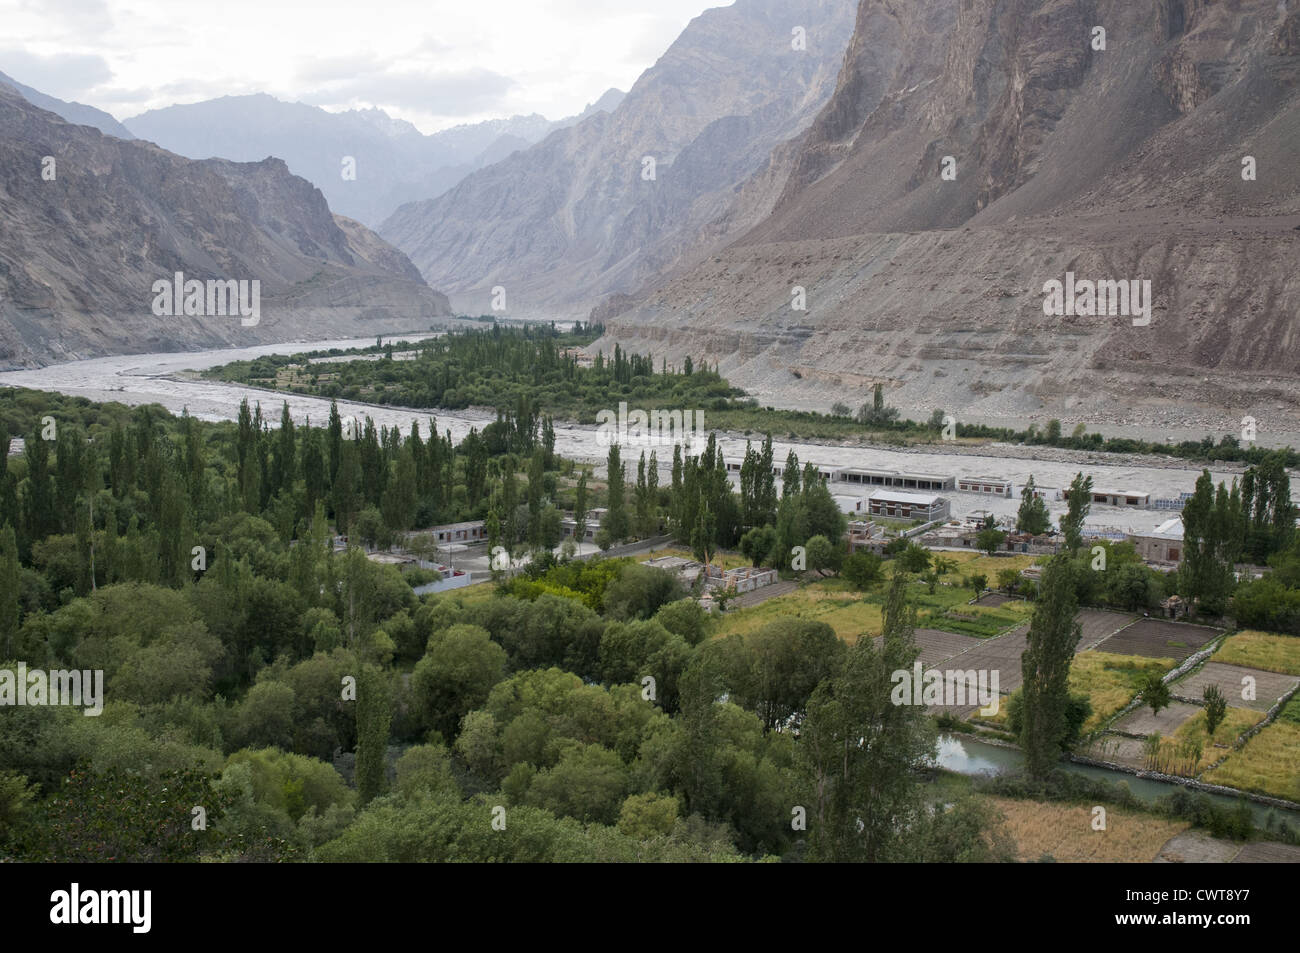 Balti village of Turtuk in the Nubra Valley of Ladakh, close to the Line of Control with Pakistani forces in northern India. Stock Photo